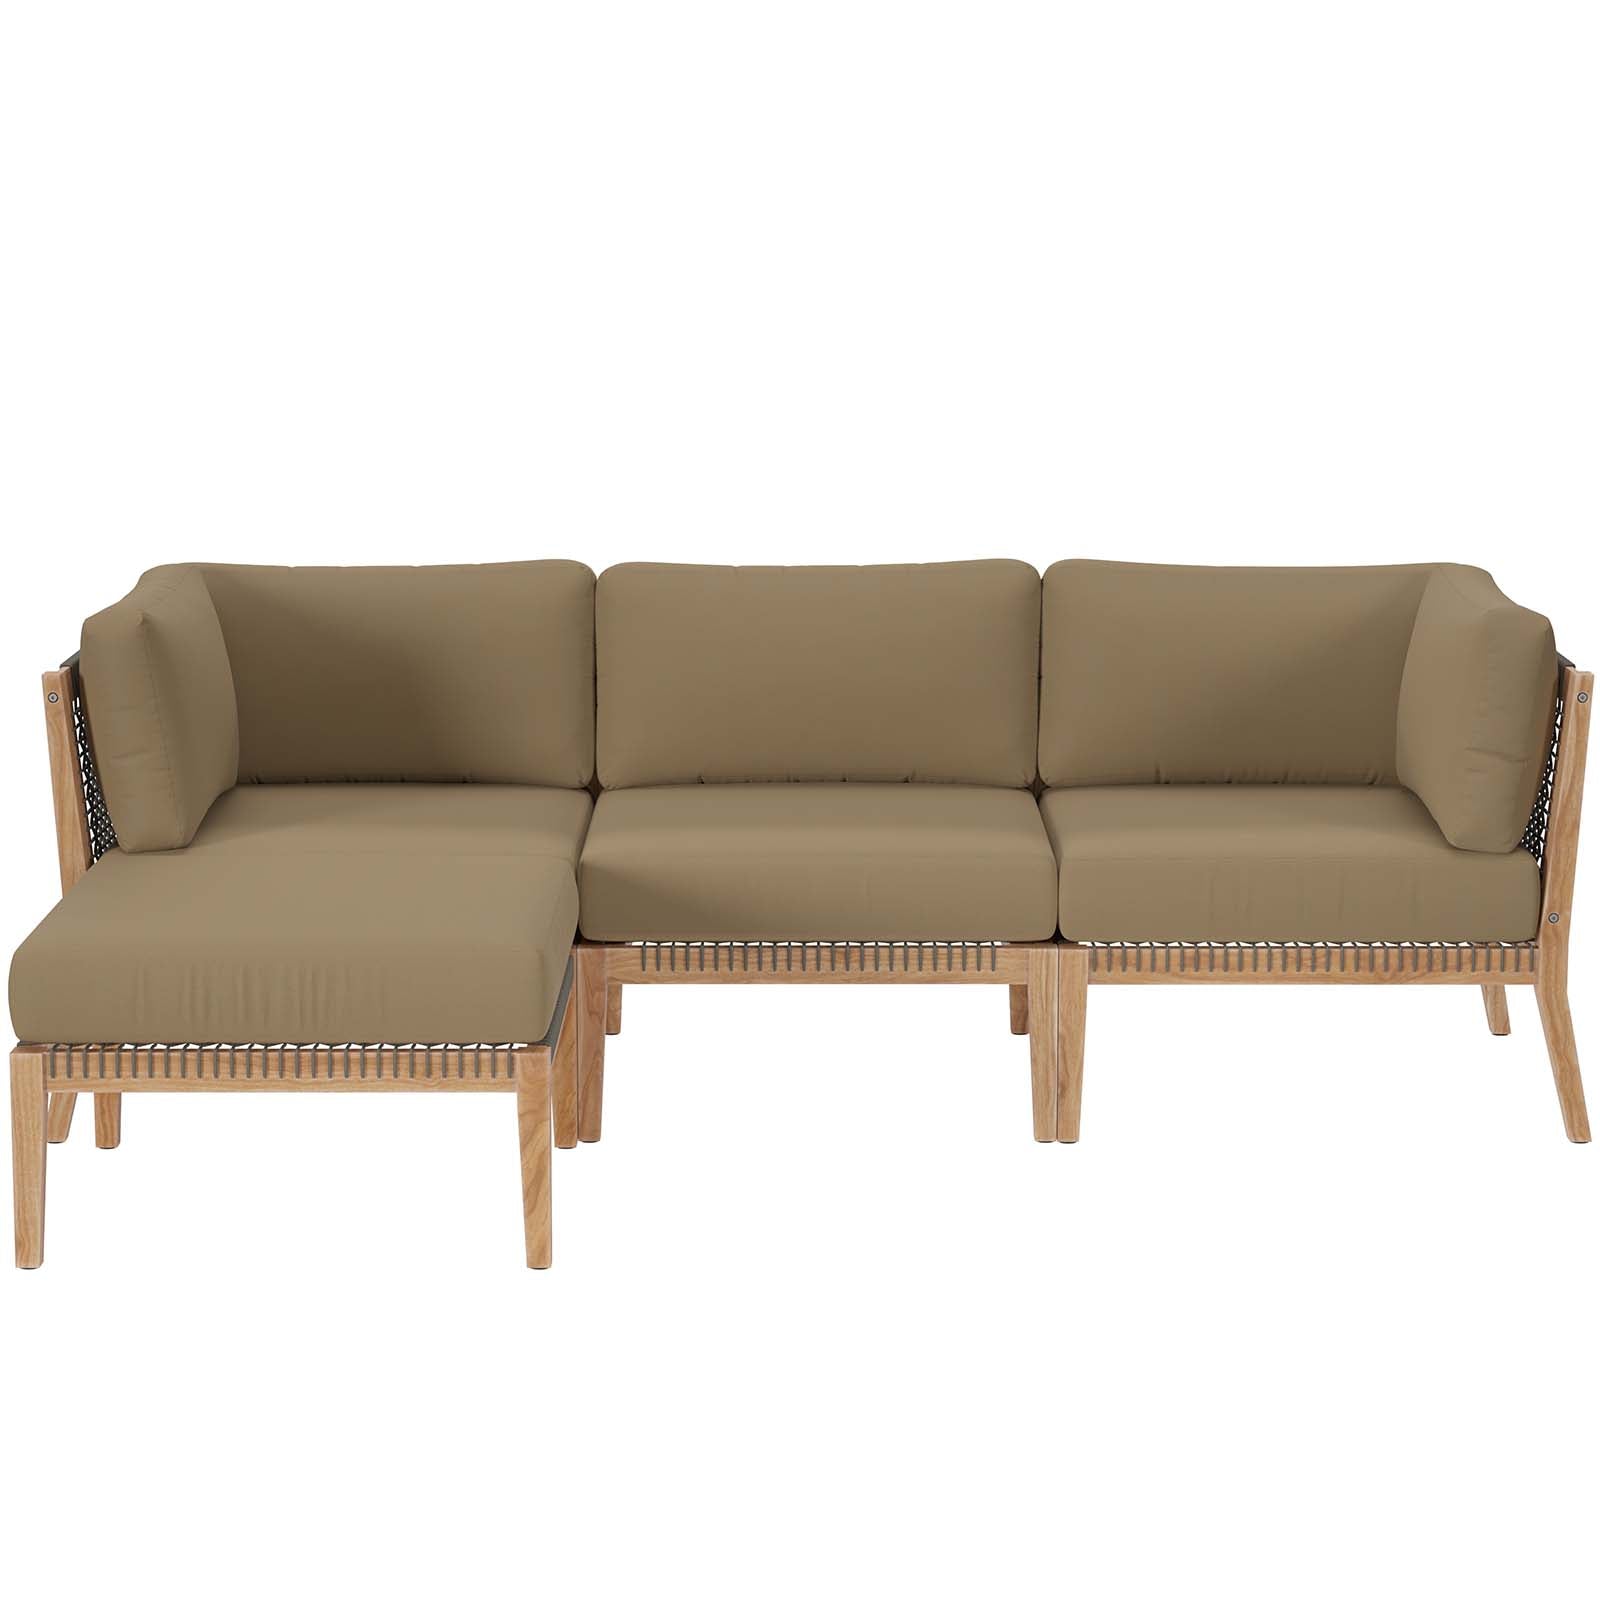 Modway Outdoor Sofas - Clearwater-Outdoor-Patio-Teak-Wood-4-Piece-Sectional-Sofa-Gray-Light-Brown